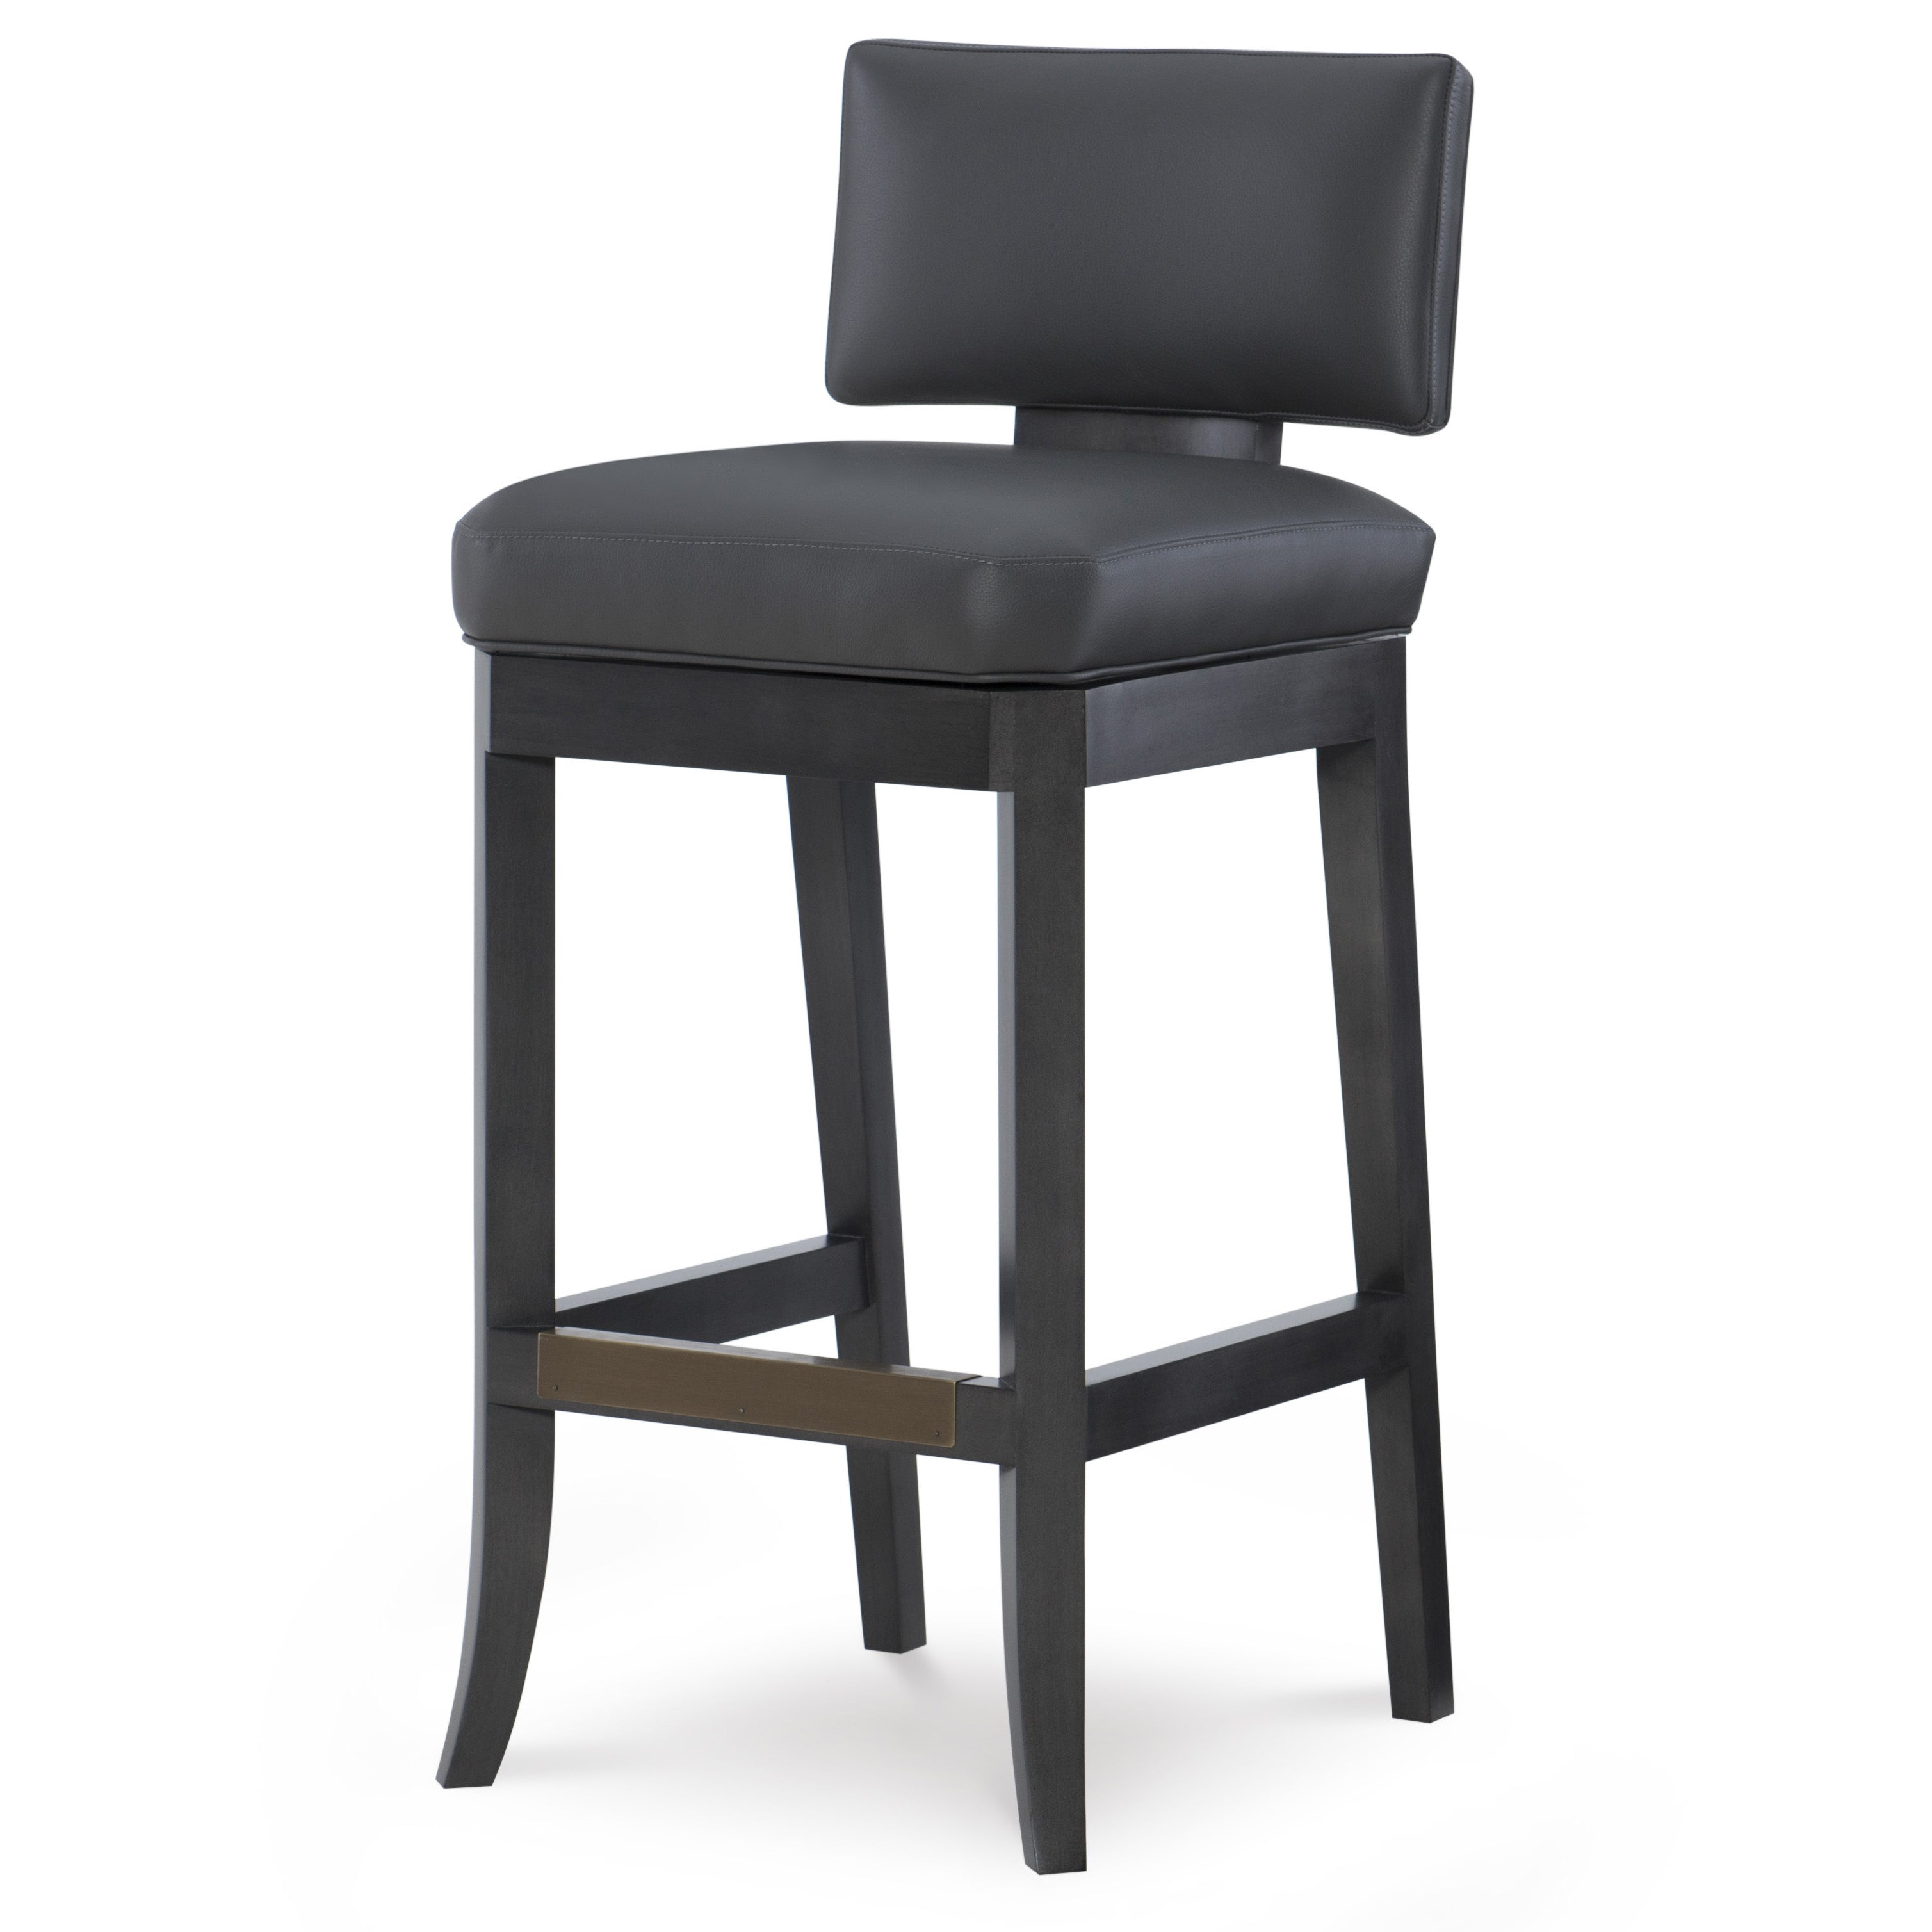 Abbey Leather Bar Stool in Dynasty Graphite leather by Wesley Hall- front view